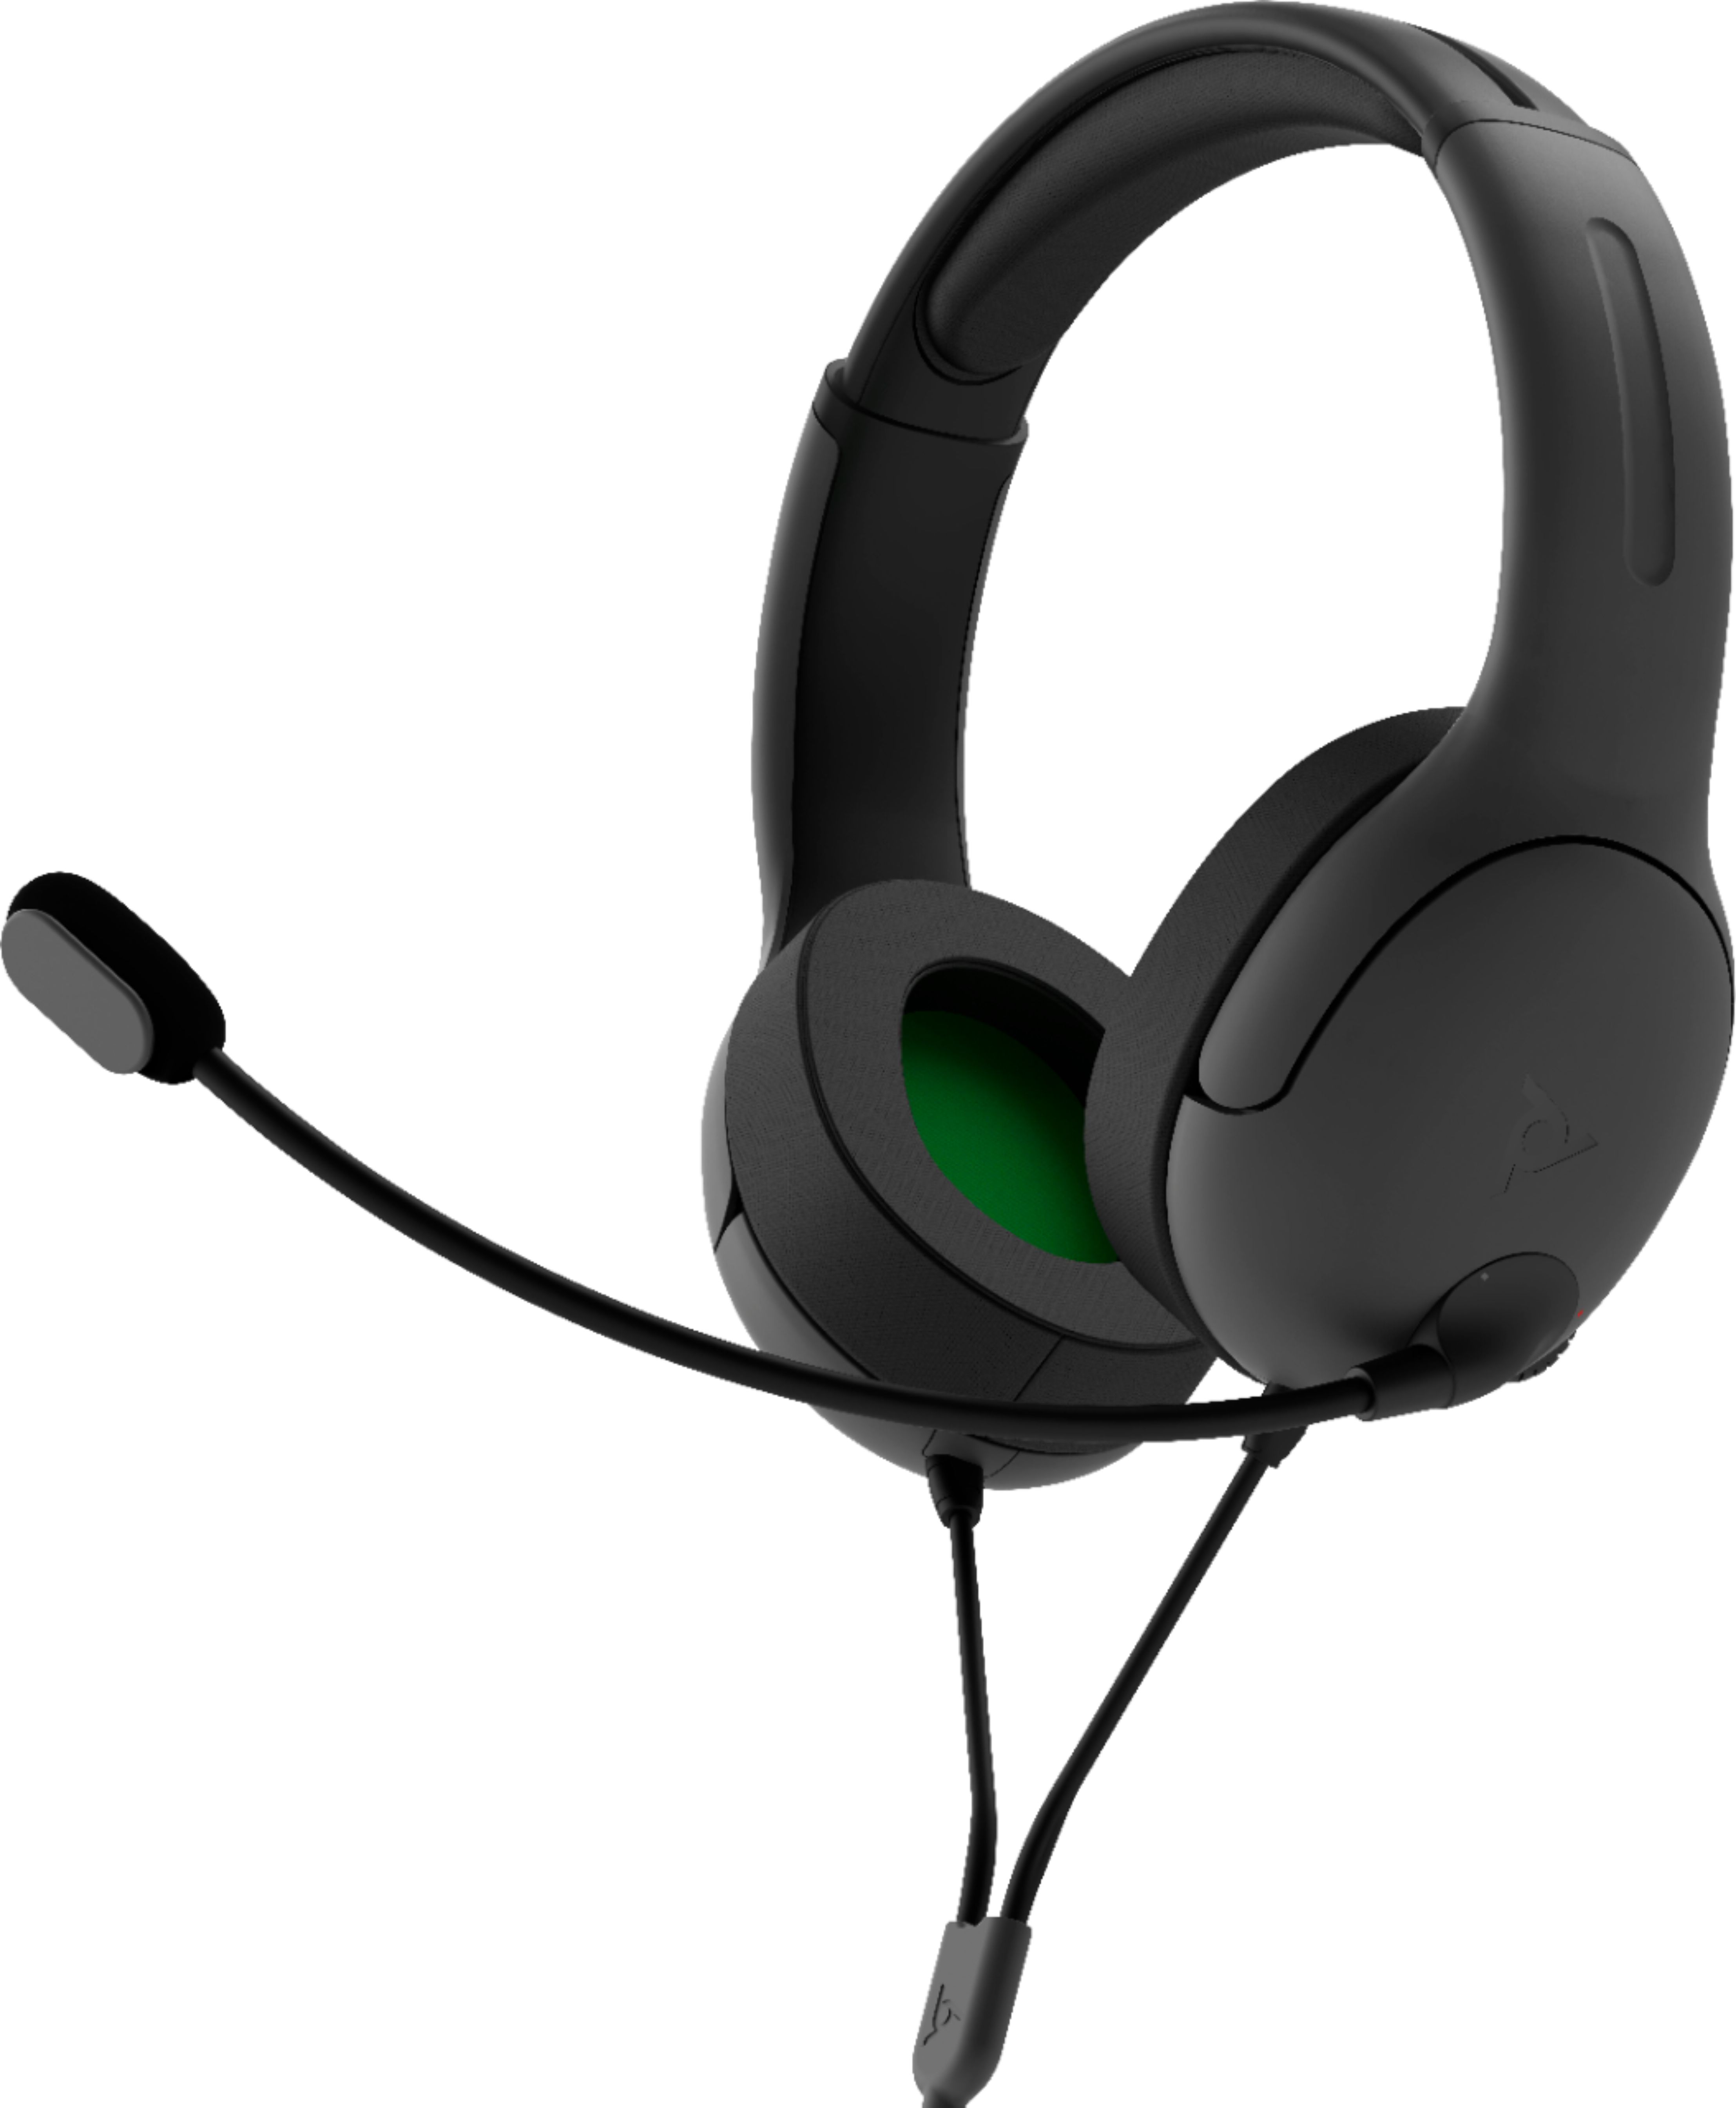 gaming headset for xbox one s